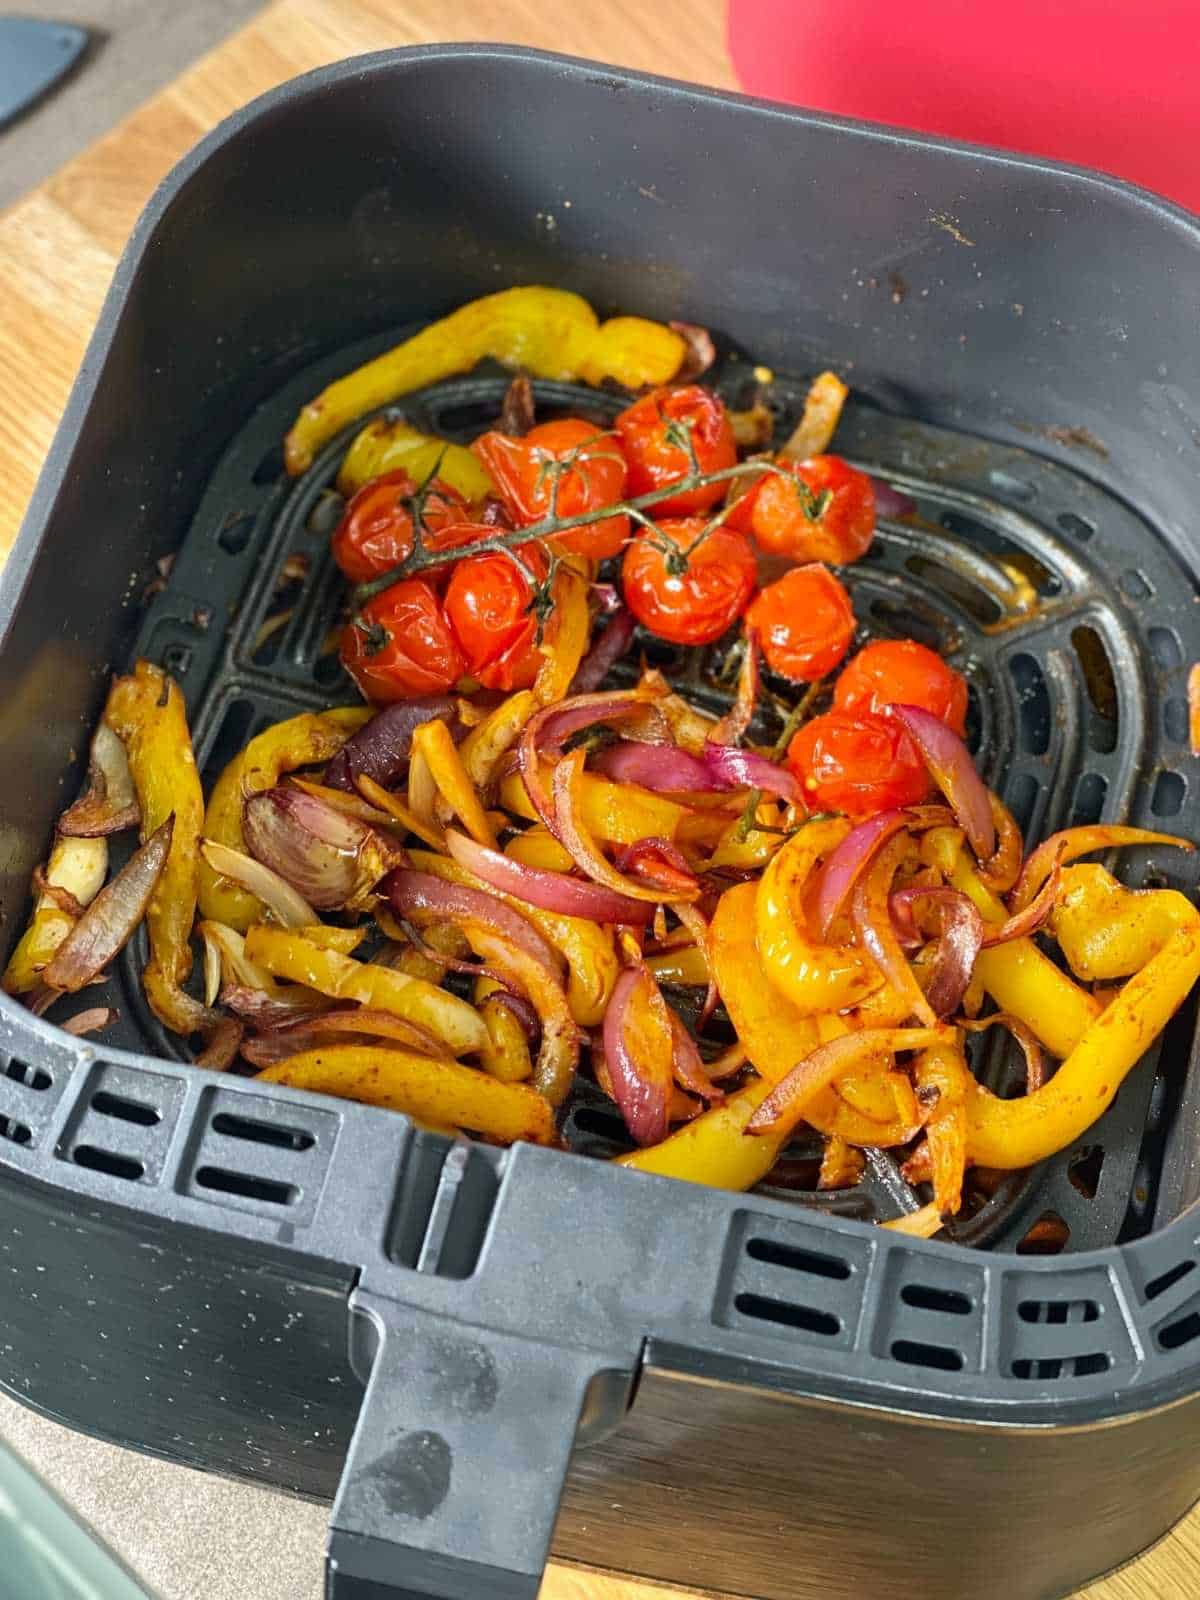 Roasted vegetables seen from above in the drawer of the Instant Vortex 4 in 1 air fryer